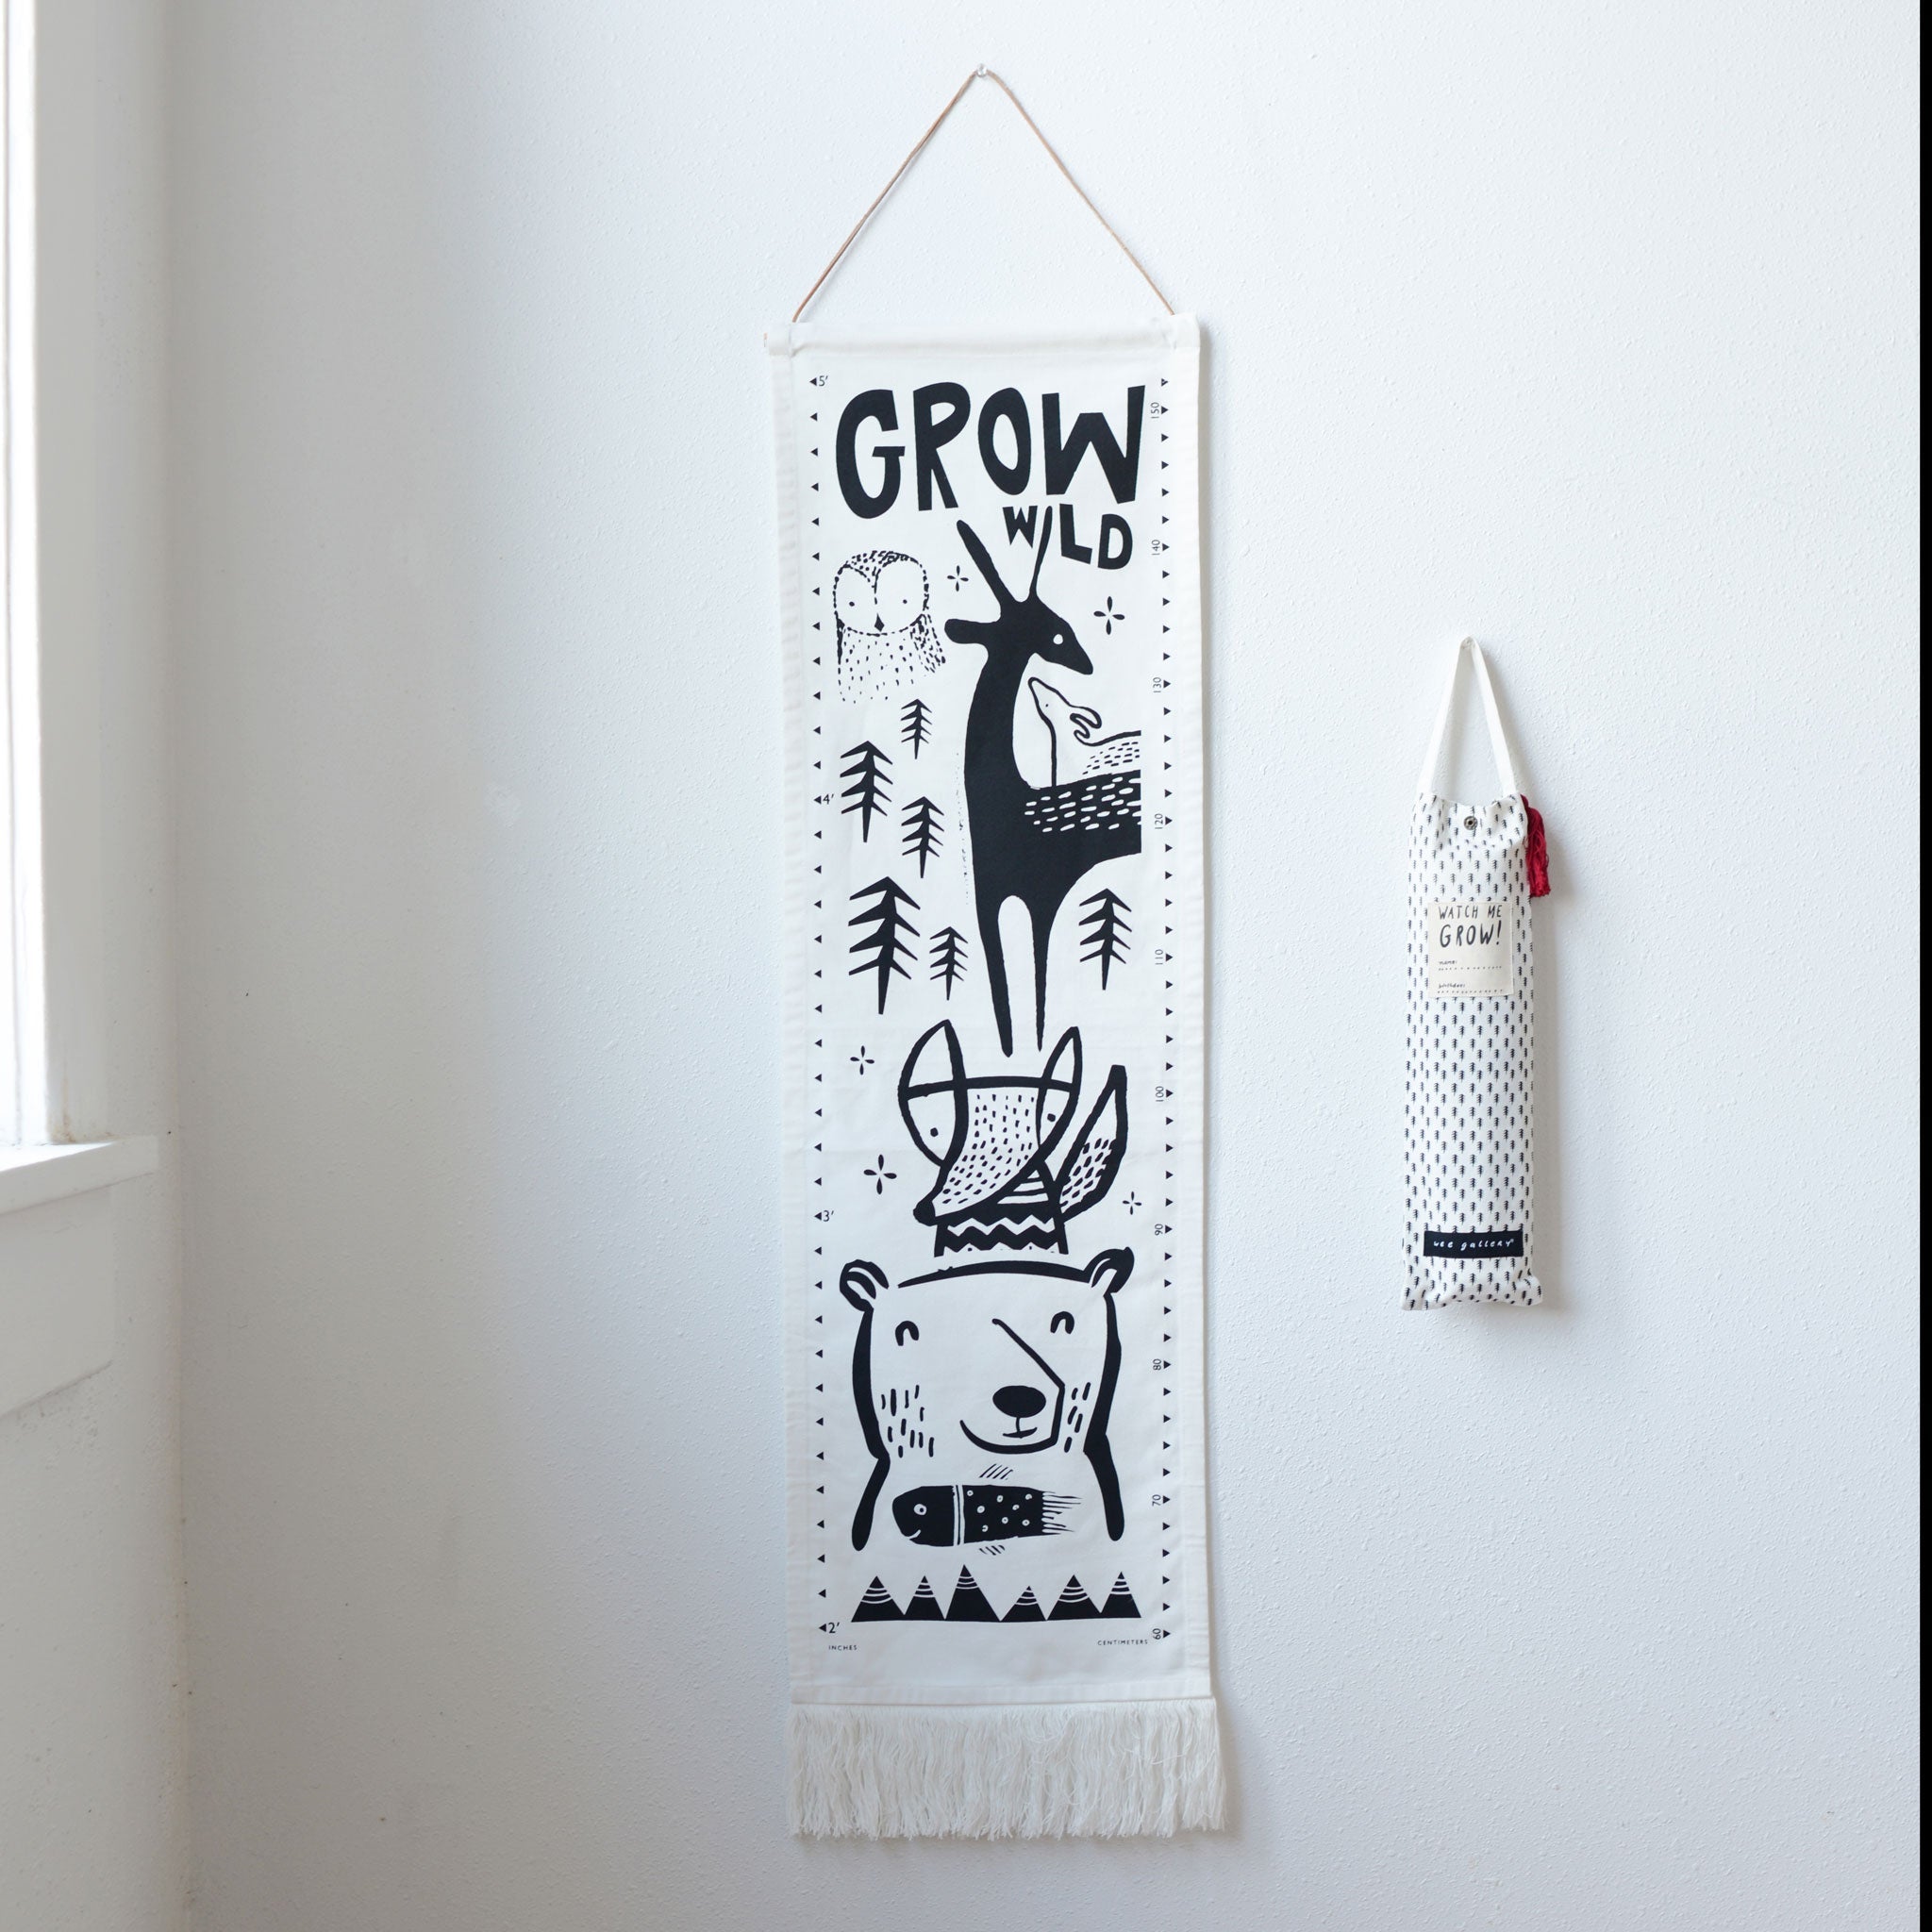 Child S Growth Chart For Wall